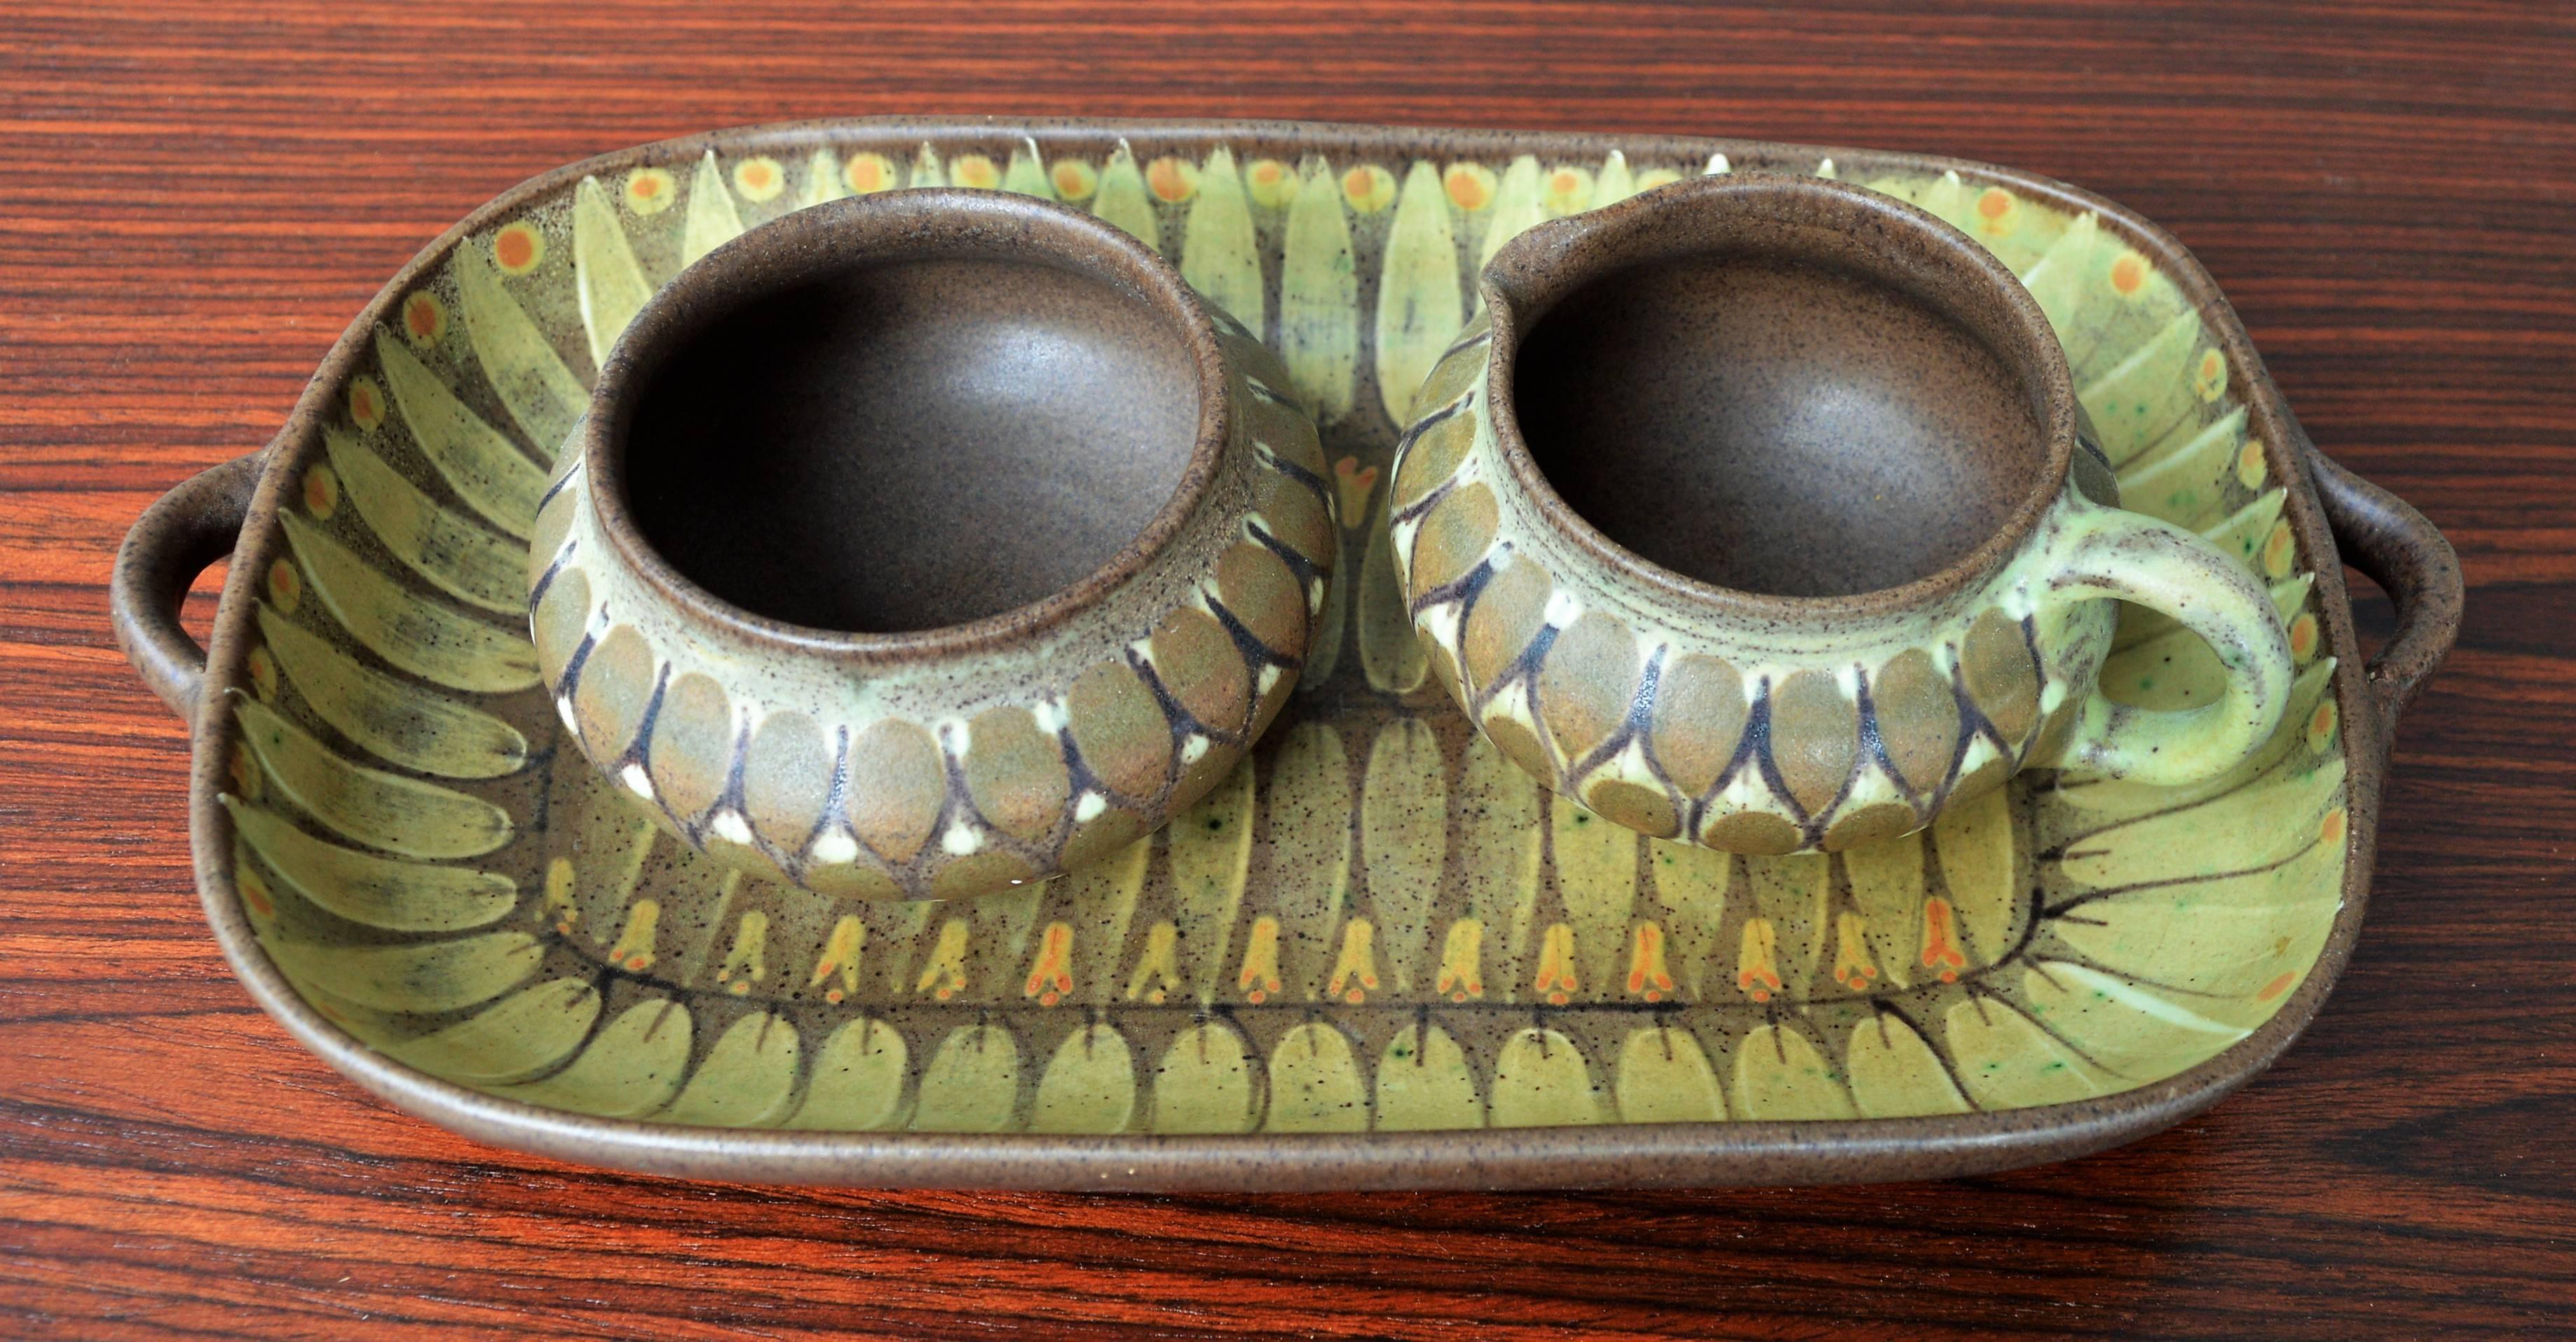 This delightful, rare three-piece ceramic set by Margrethe Dybdahl, Denmark, circa 1960s. These studio pottery pieces are all hand made and hand painted with a delicate feather decor in green, yellow and brown. Marked on the back with the makers